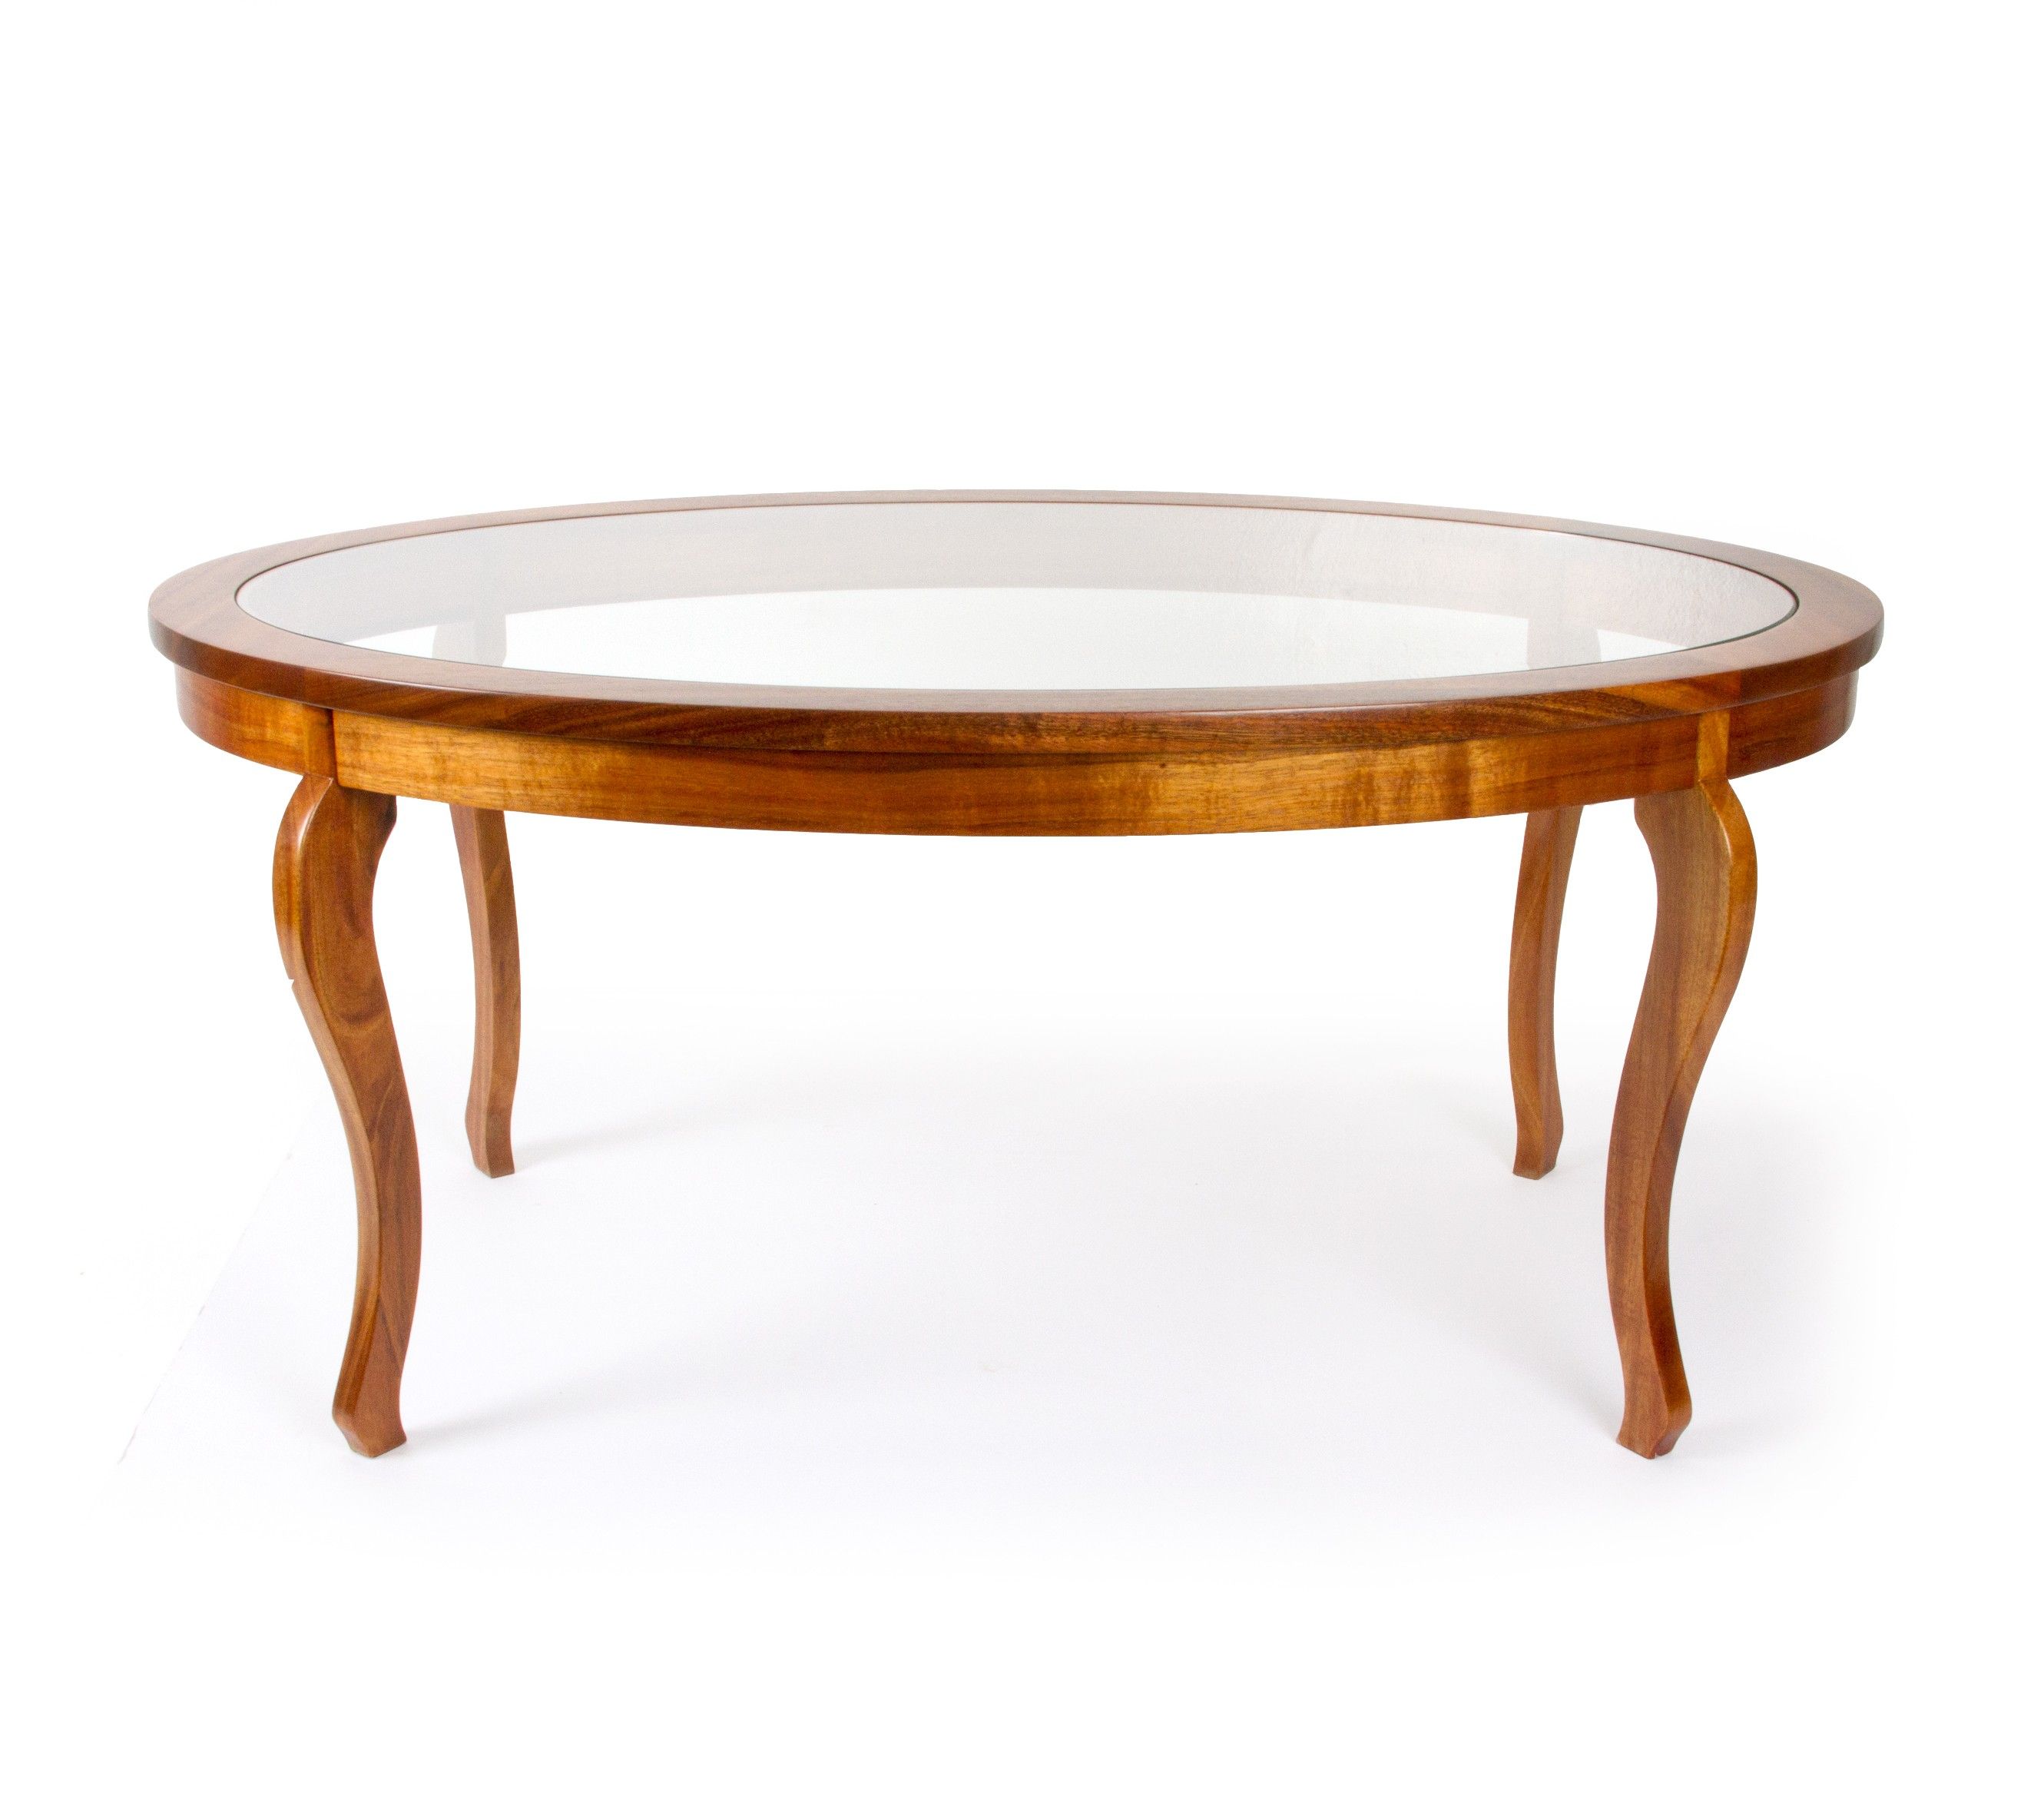 Small Modern Coffee Tables Rare Vintage Retro 60s A Younger Rustic Meets Elegant In This Spherical (View 7 of 10)